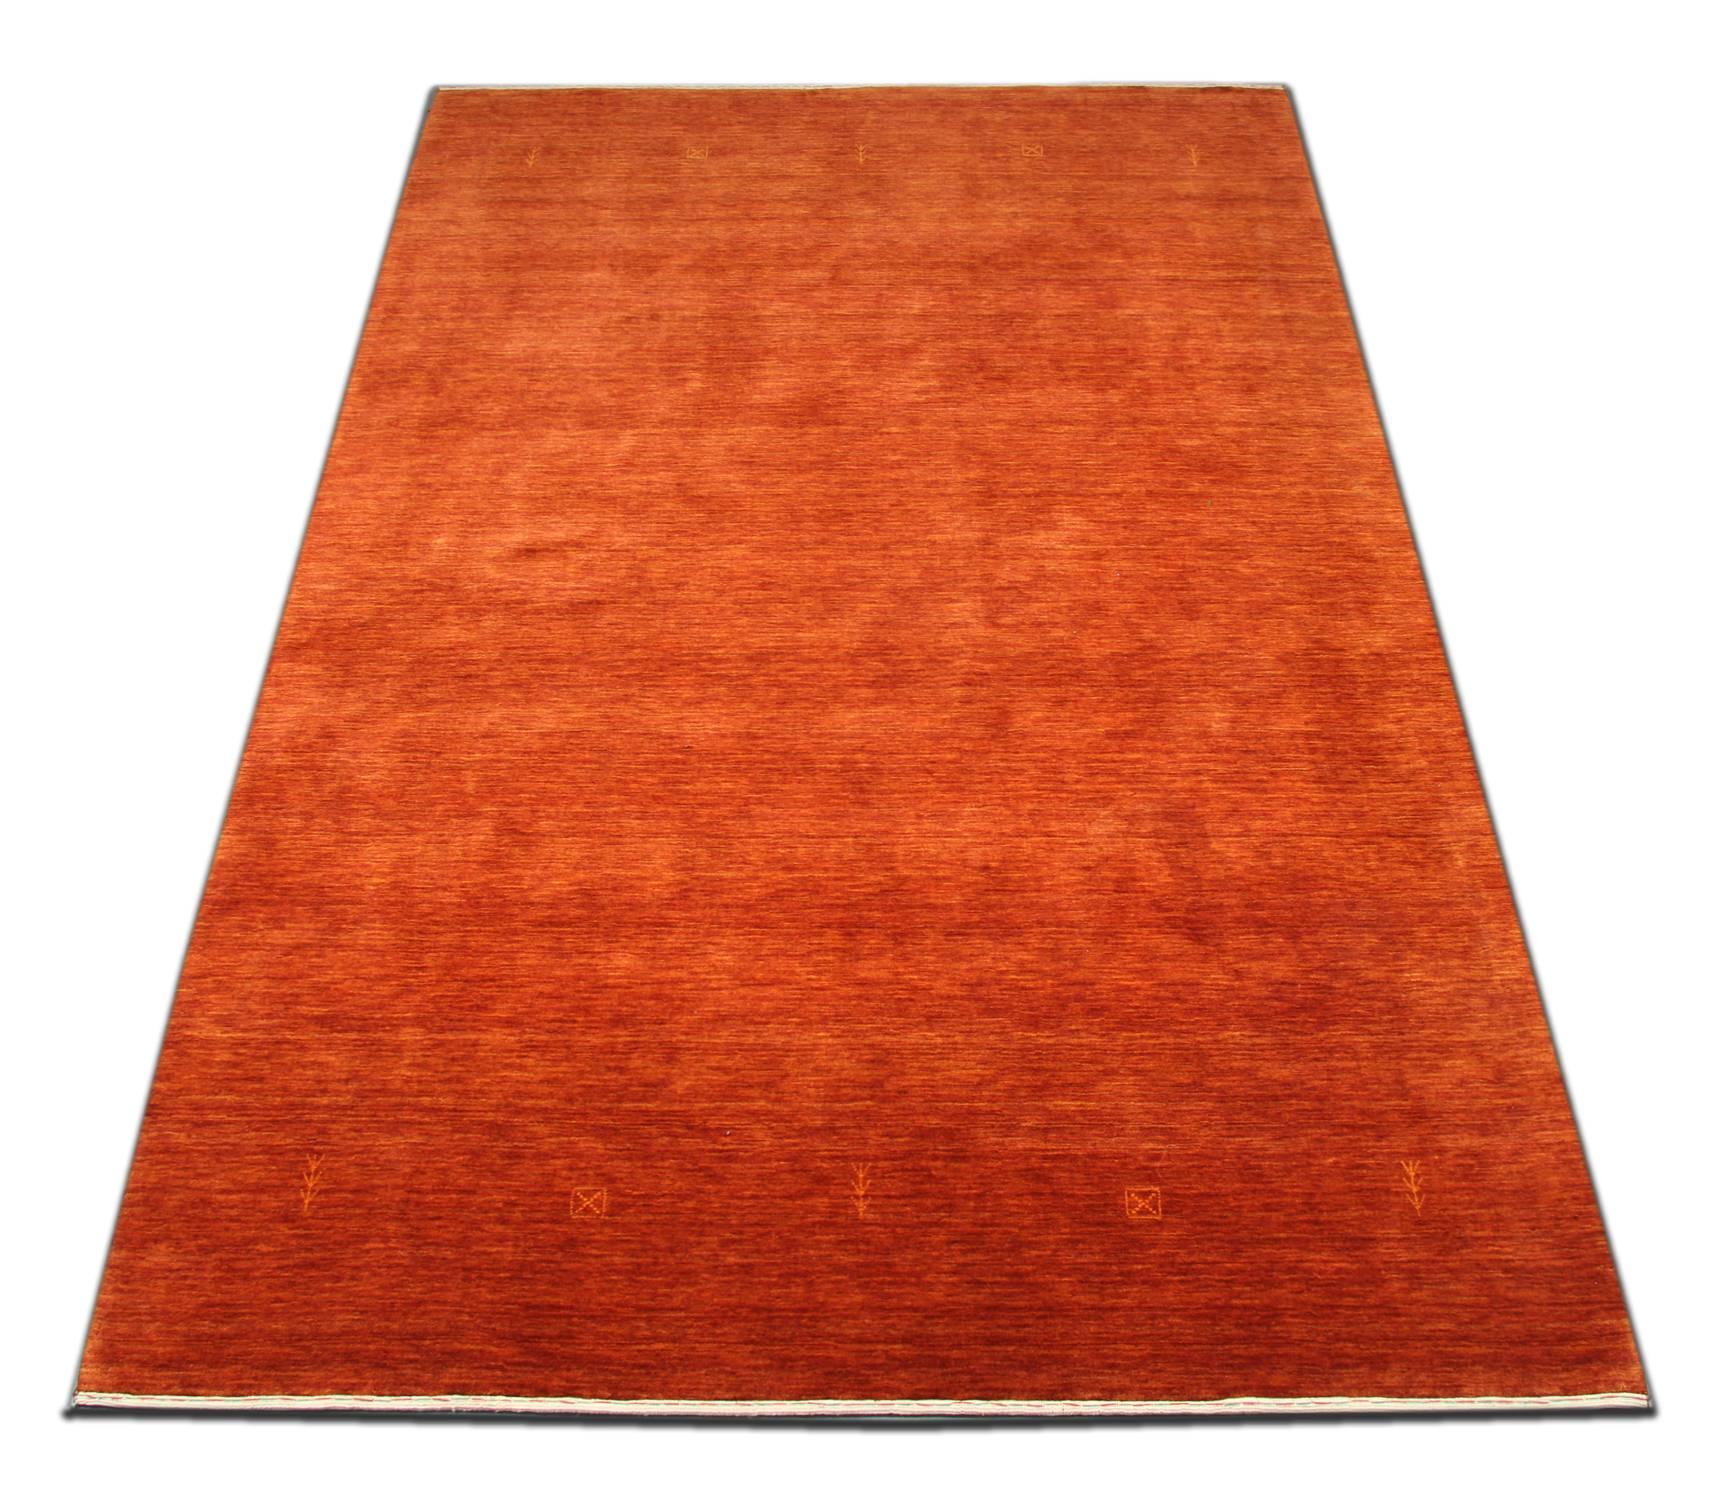 With rich colors and abstract elements, this modern woven rug gives a subtle contemporary appearance. Featuring beautiful orange-red colors, this red rug is grounded in stylish colors that will add a touch of modernized sophistication to nearly any